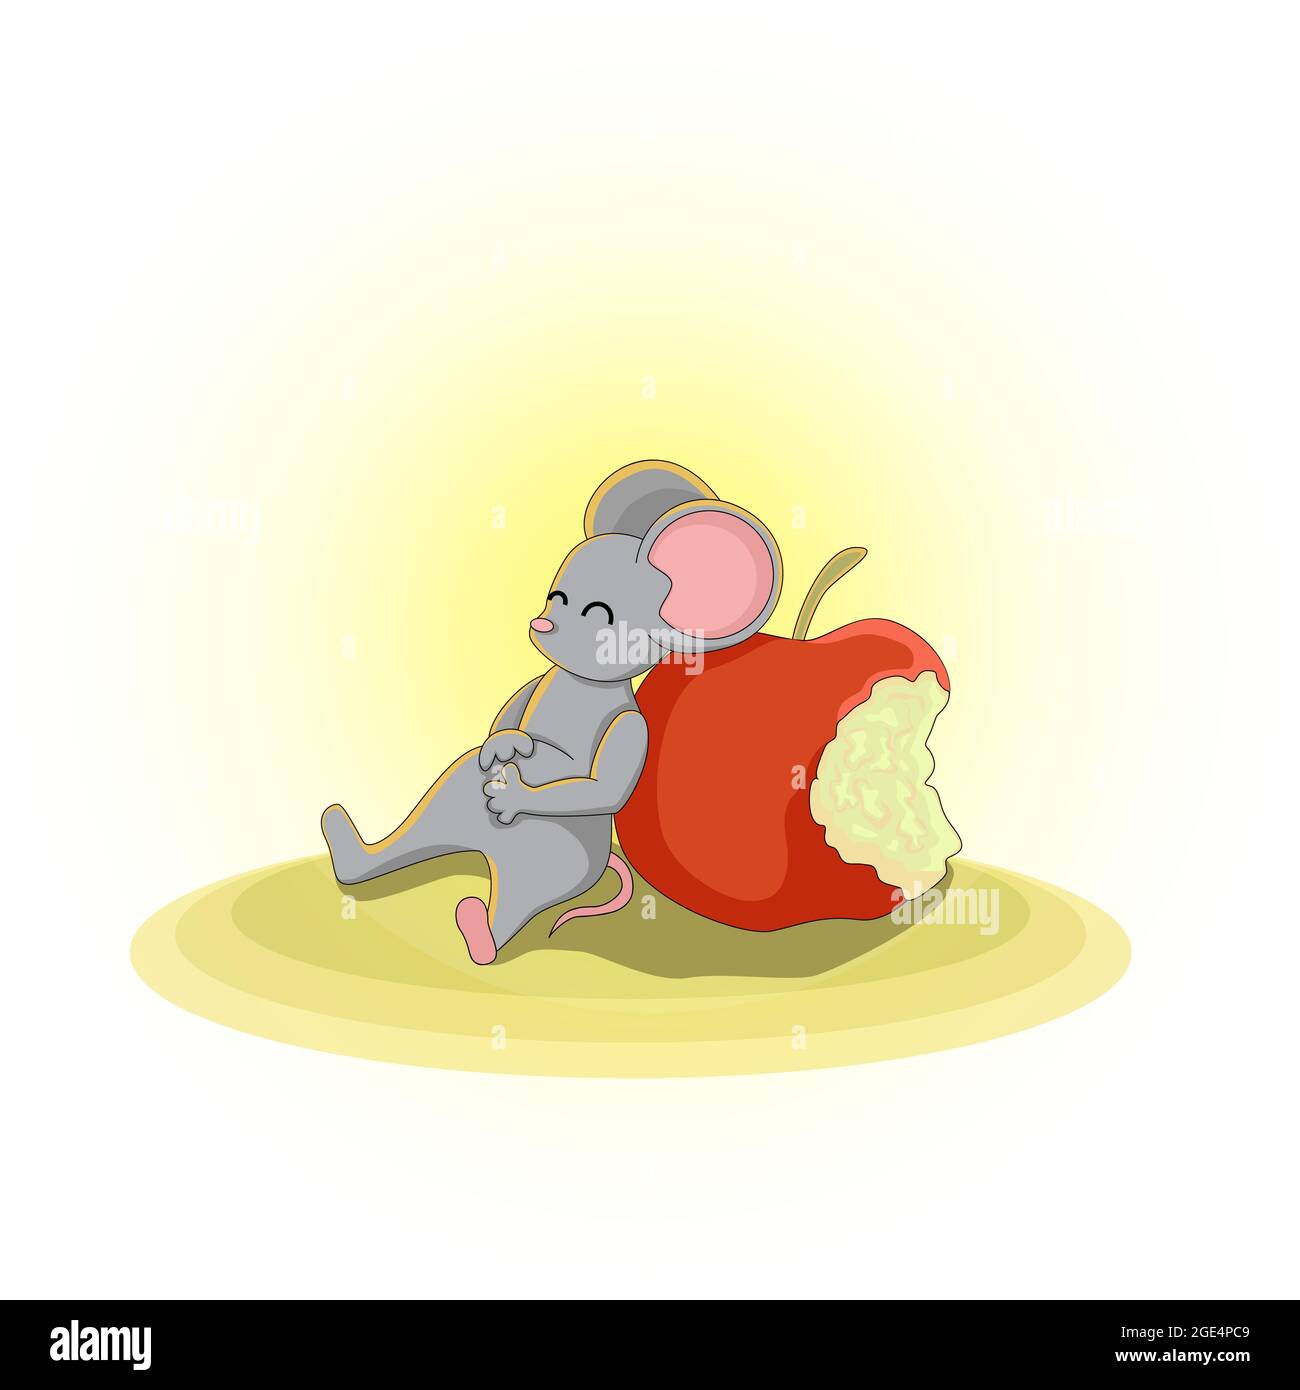 Vector image of a mouse with a gnawed Apple. Series of illustrations. Calendar item Stock Vector